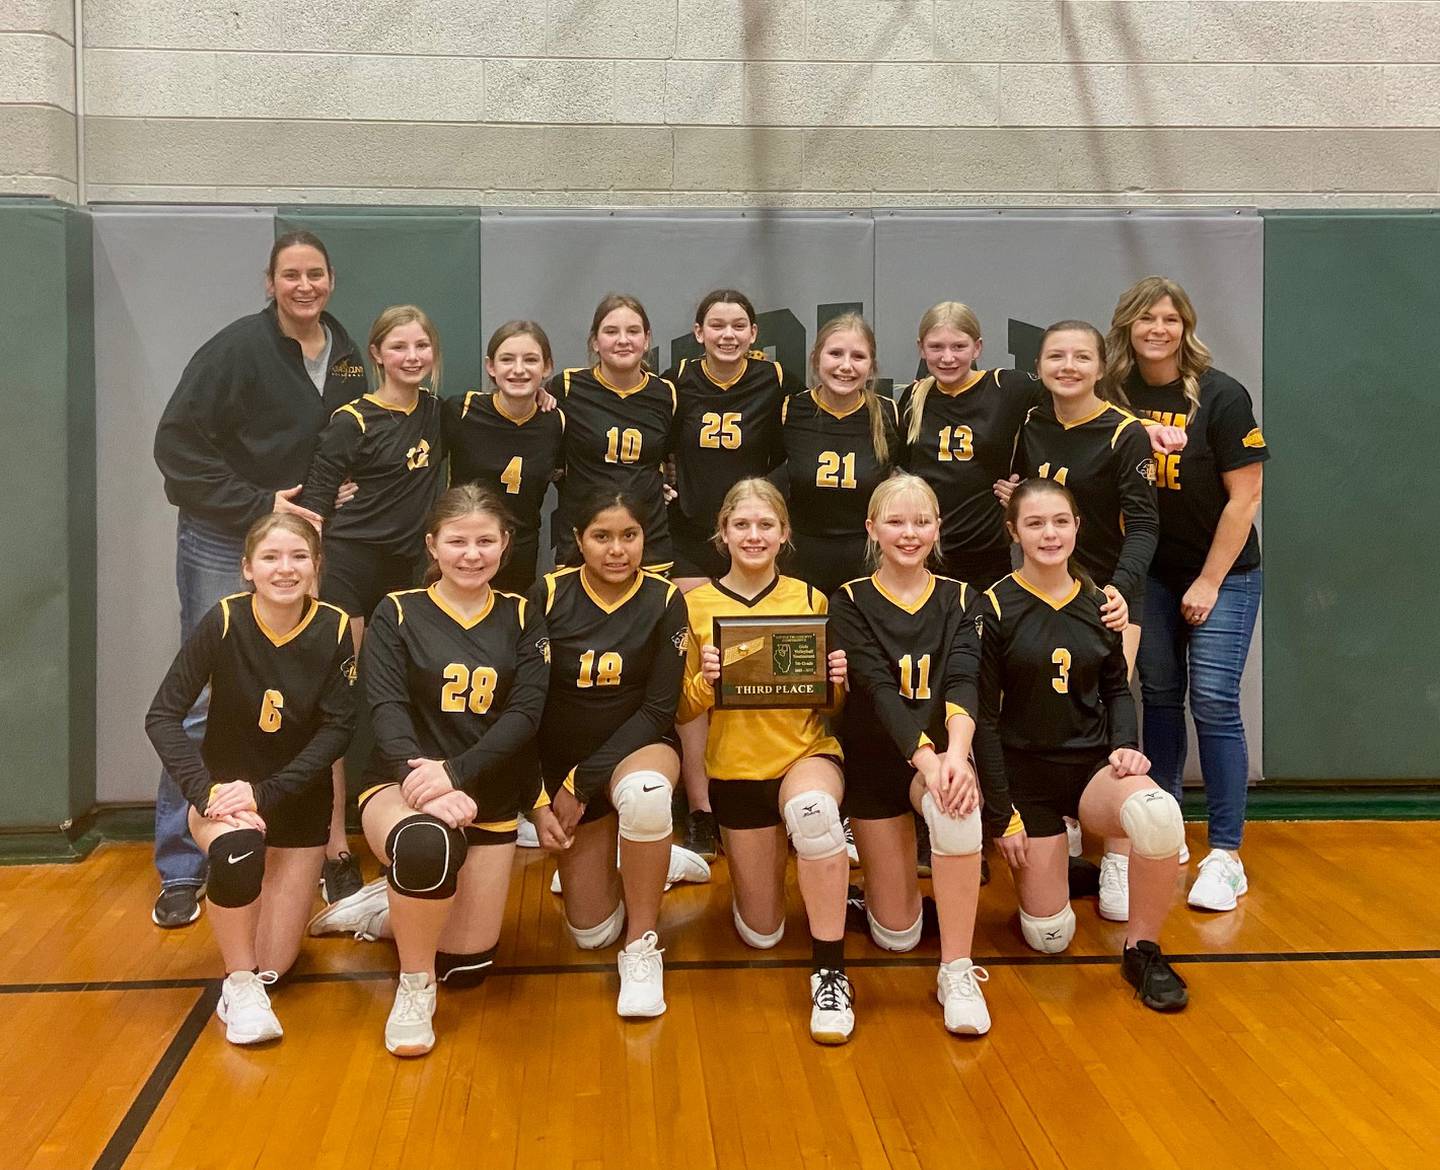 The Putnam County 7th grade volleyball team took third place in the Tri-County Tournament. The Lady Pumas defeated Fieldcrest to advance 25-17, 25-17, lost to Ronoake Benson, 18-25, 13-25 before defeating El Paso-Gridley  25-12, 22-25,  25-21 to take third place.